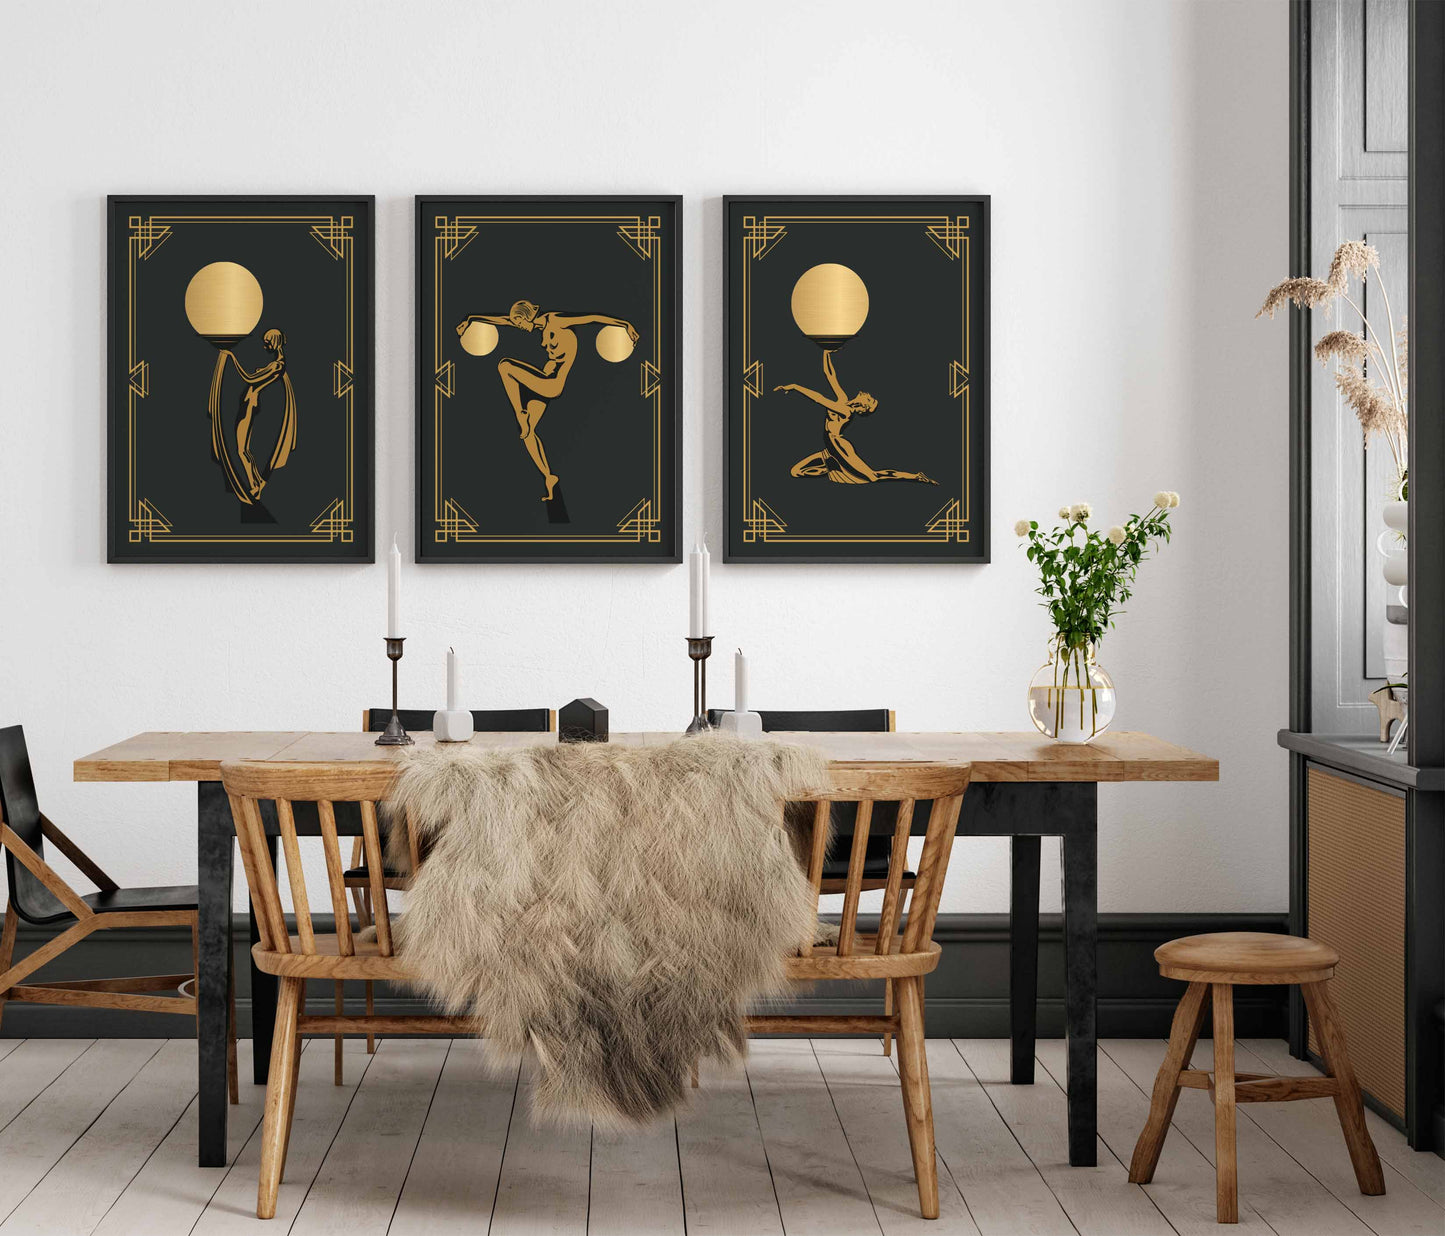 Set of art deco prints in black and gold, set of 3